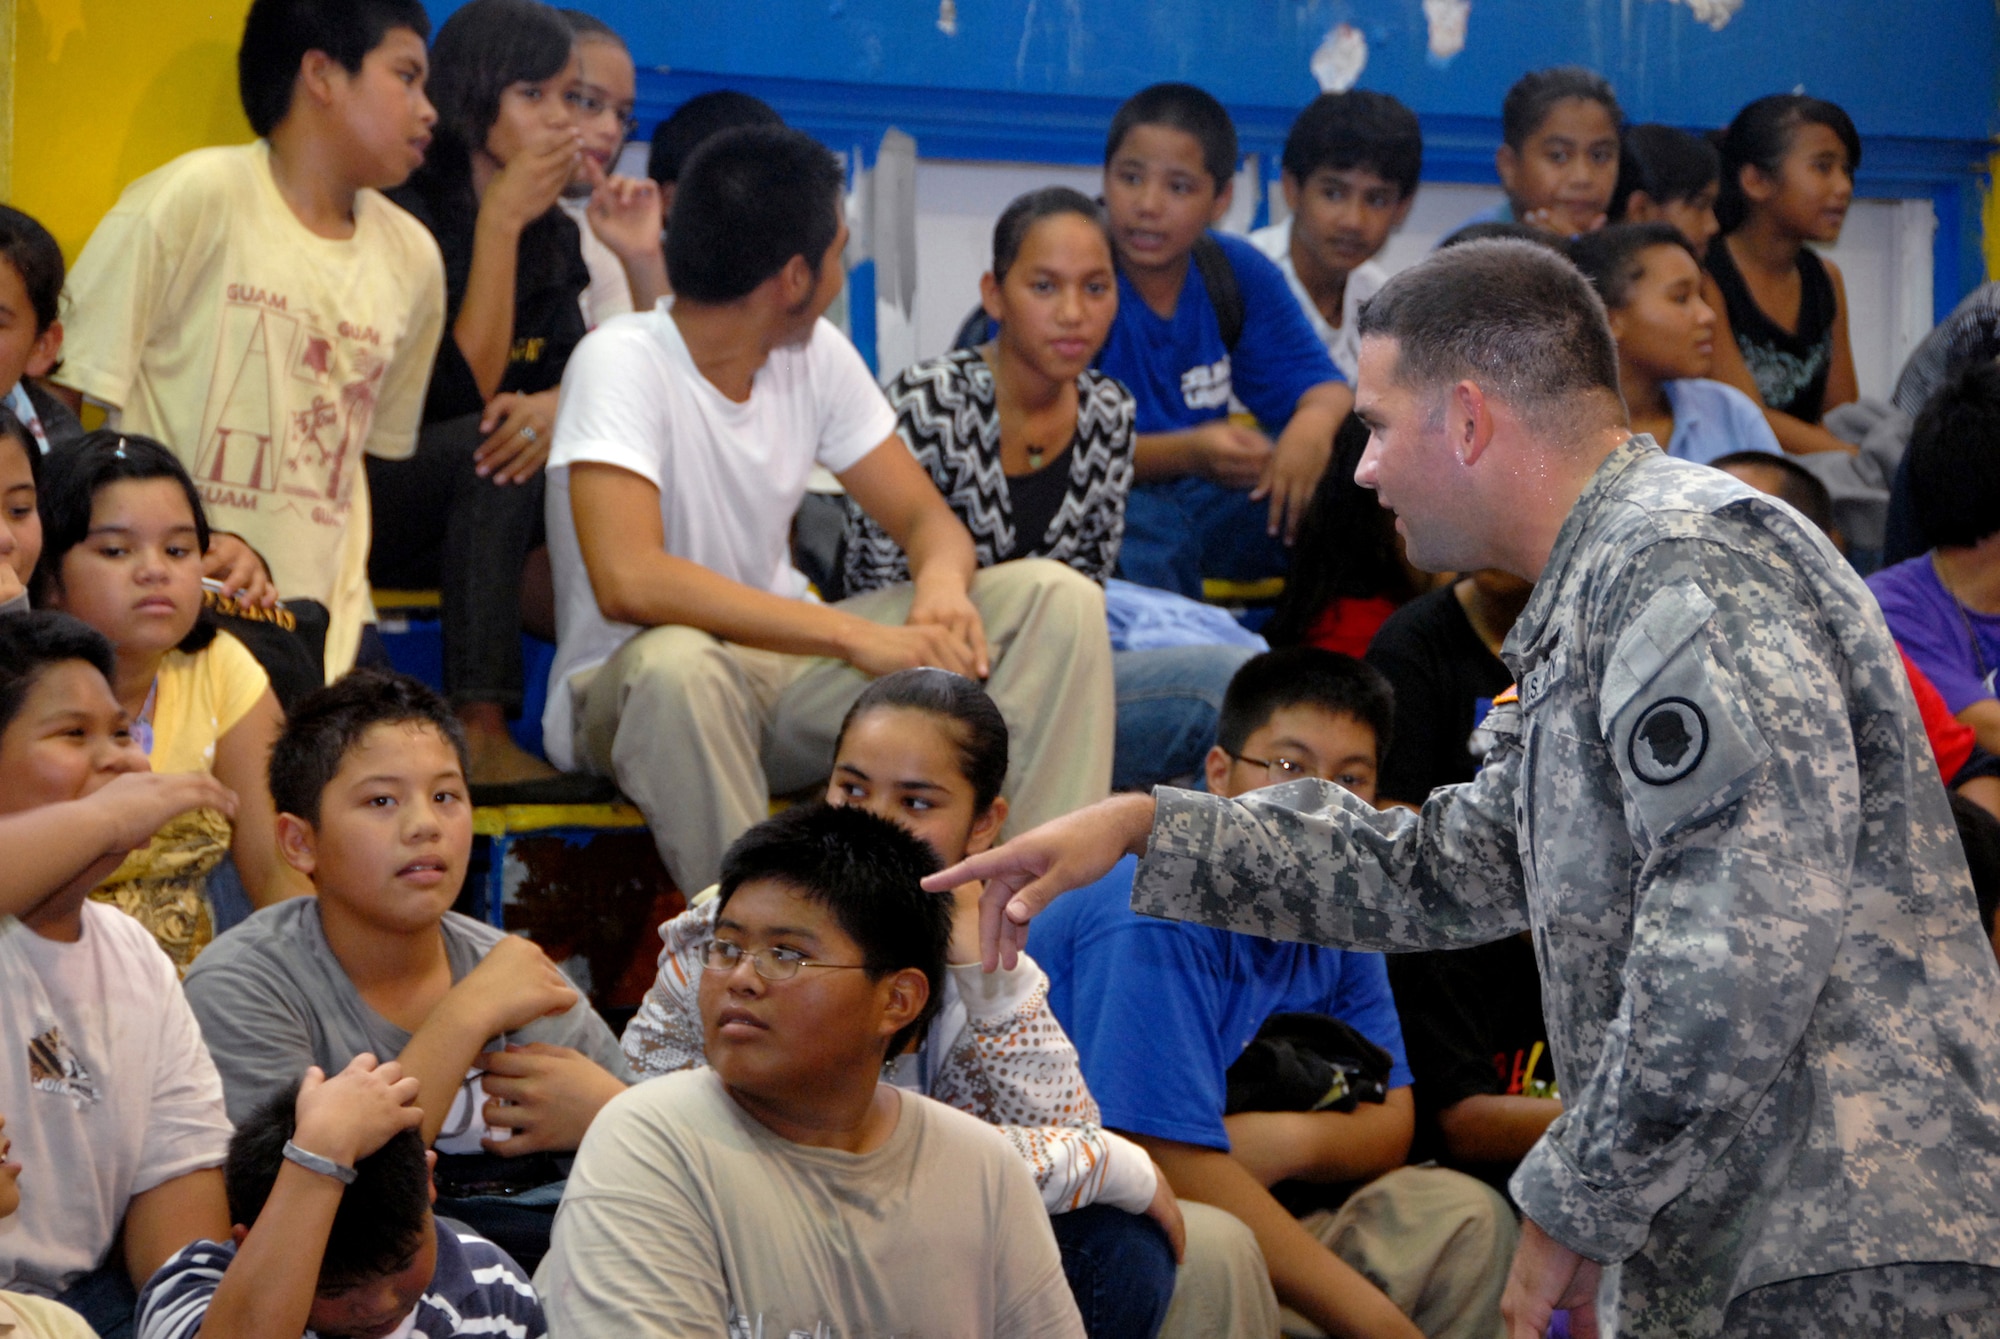 Specialist Bruce Blanton, Counterdrug Hawaii National Guard, debriefs students from V.S.A. Benavente Middle School on Guam, following team building exercises led by Counterdrug personnel June 29. The Counterdrug team visited the school as part of the counter drug program, Drug Demand Reduction program, which emphasizes education and training as part of its drug abuse prevention program. (U.S. Air Force photo/Tech. Sgt. Betty J. Squatrito-Martin) 